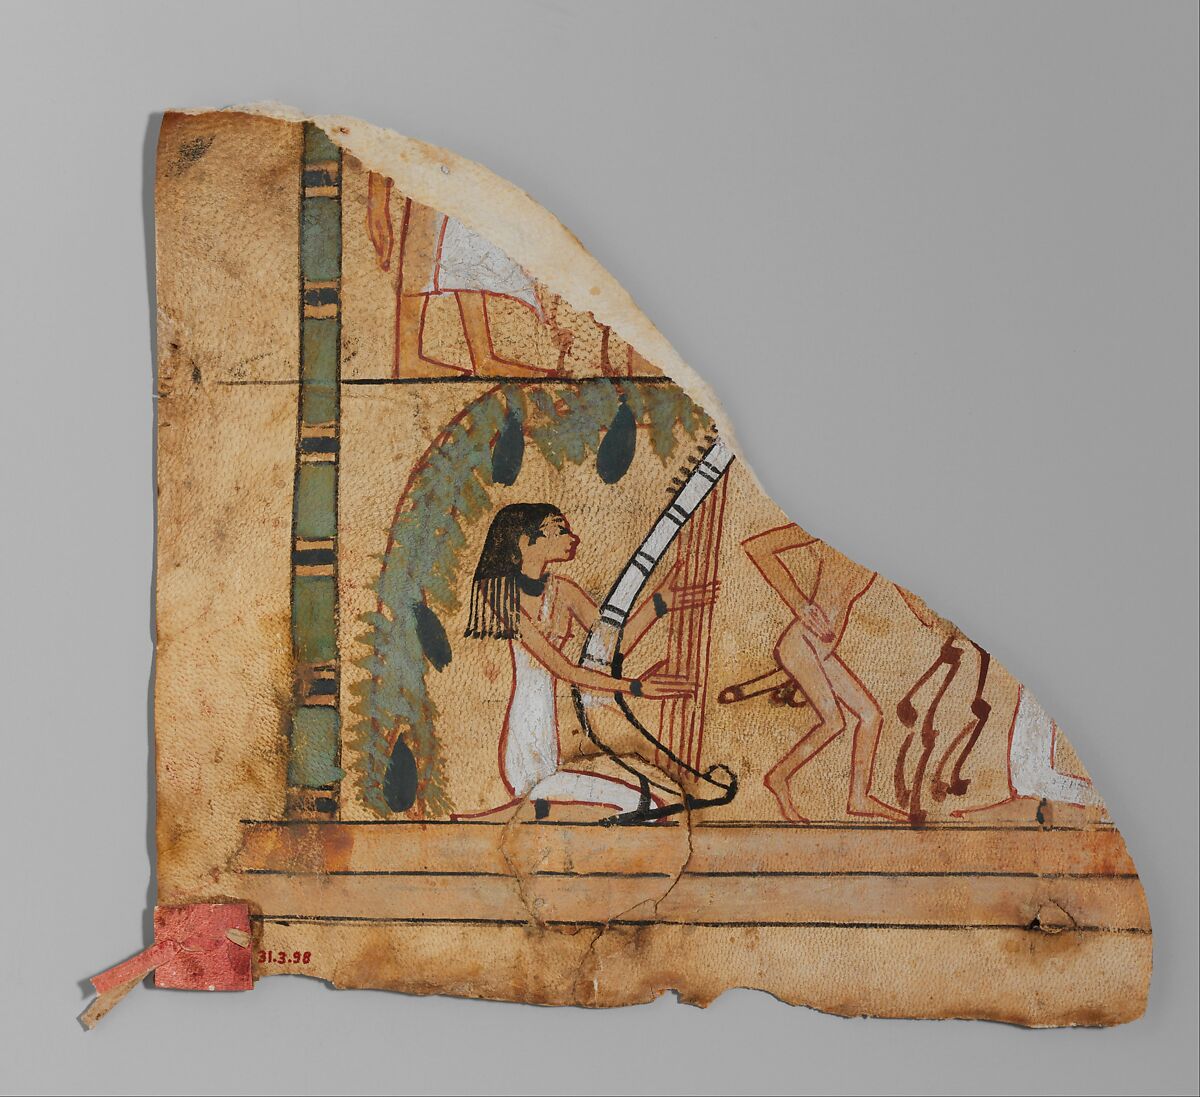 Fragment of a Leather Hanging(?) with an Erotic Scene, Leather (probably goat), paint 